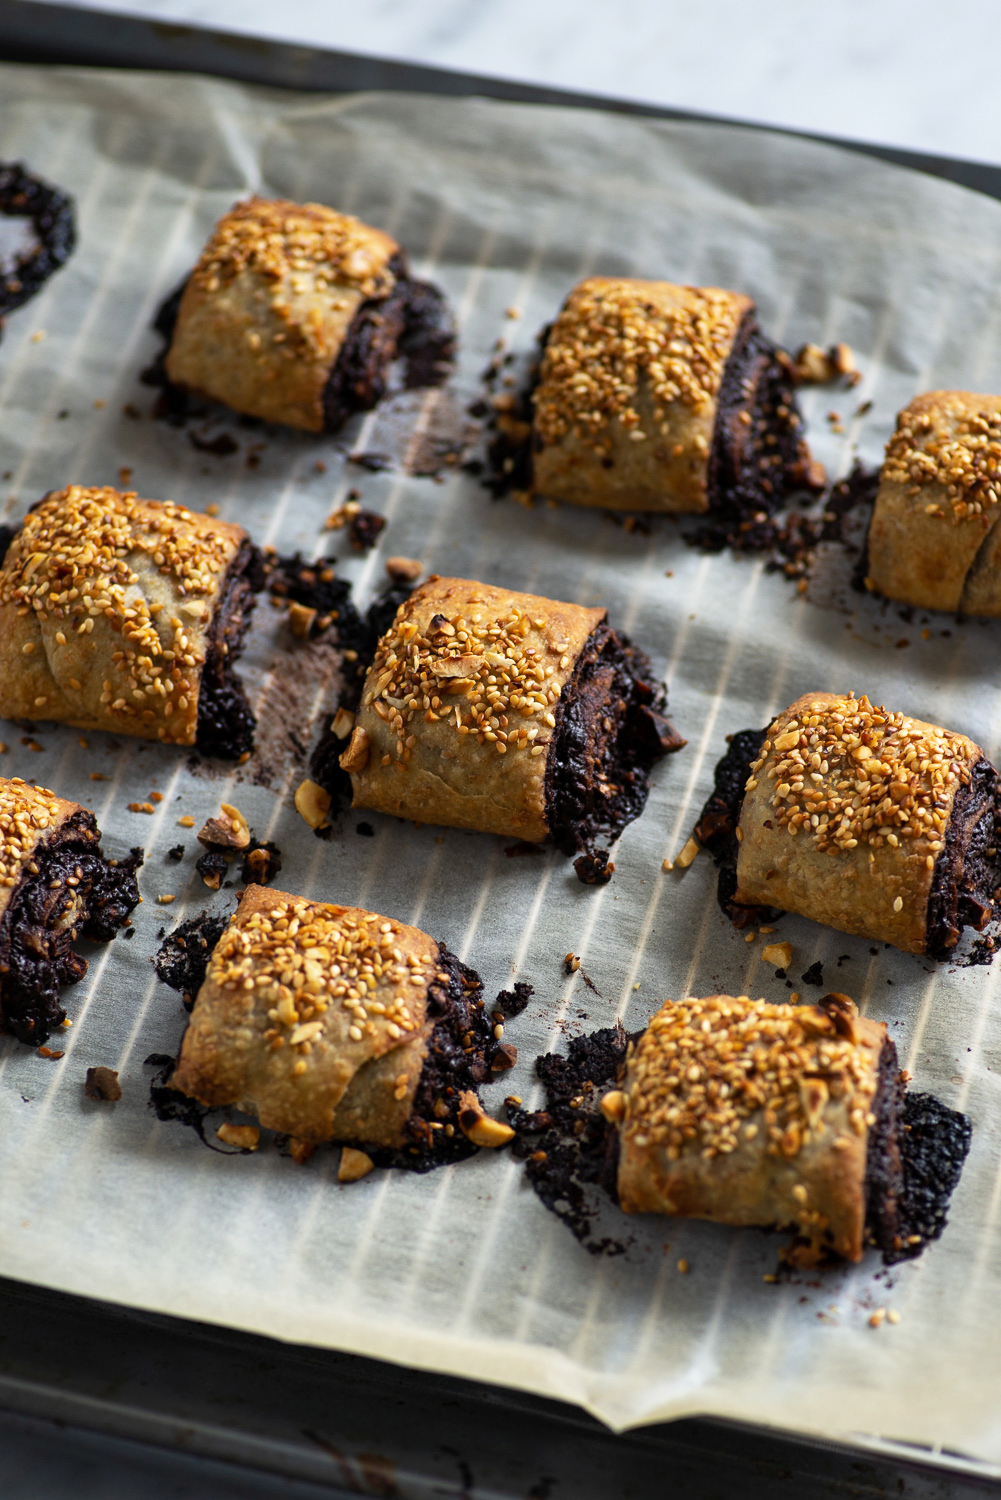 Chocolate, Sesame and Hazelnut Rolls by Yotam Ottolenghi in the new SIMPLE cookbook